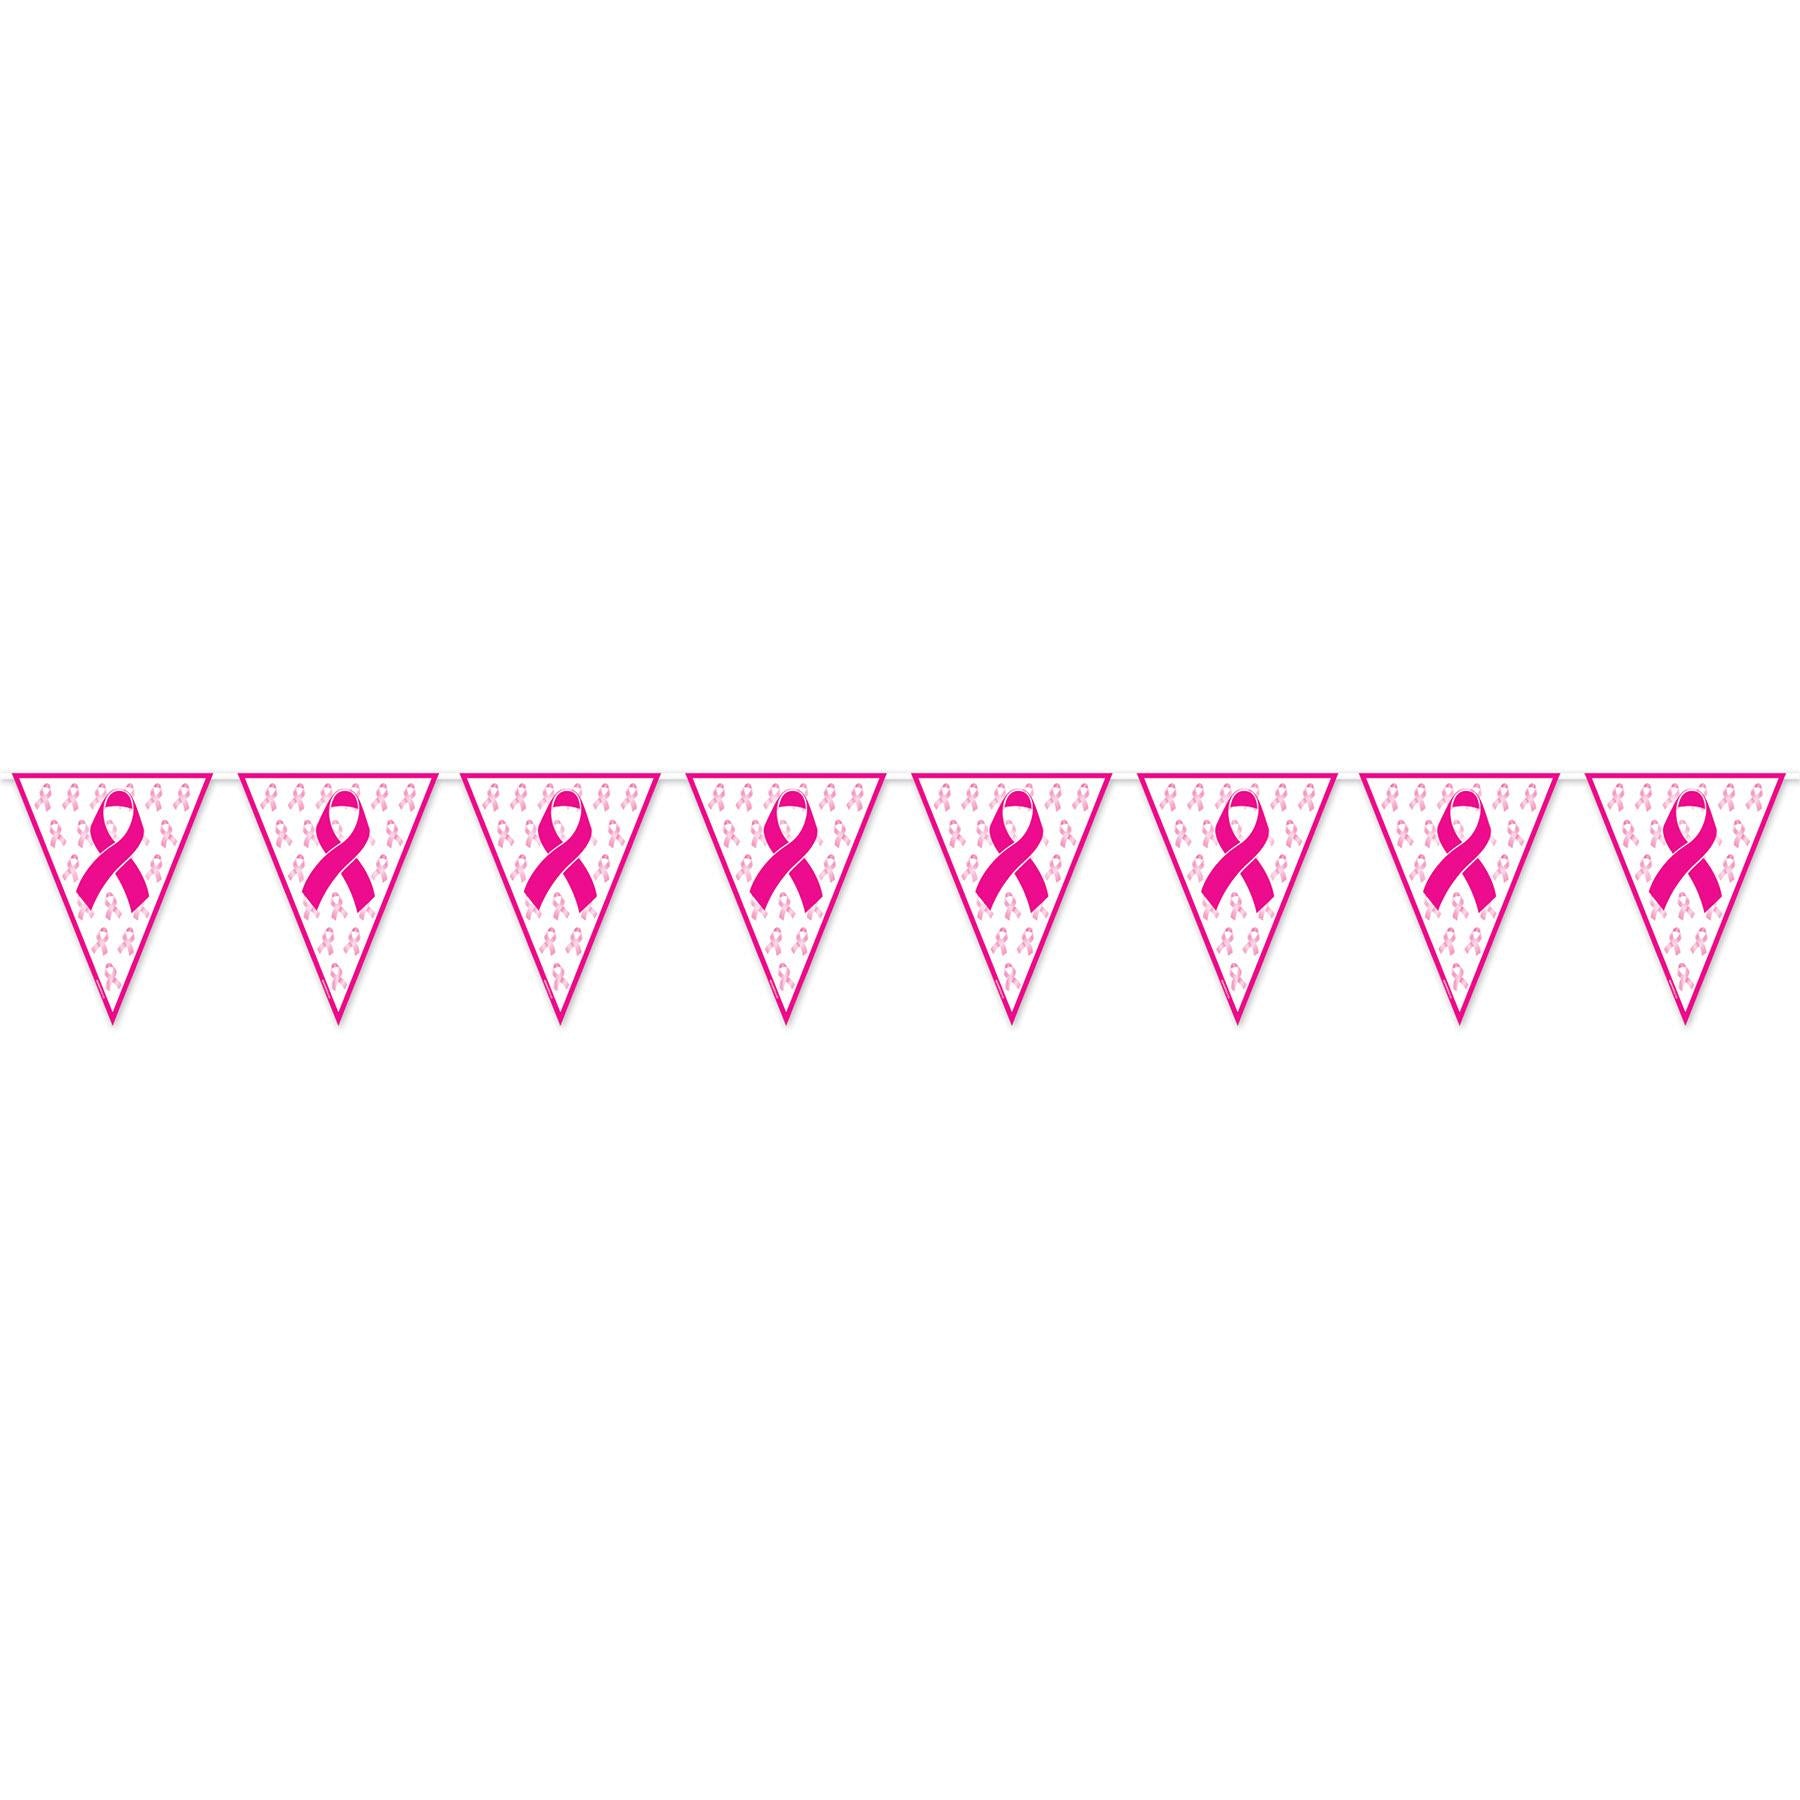 Beistle Pink Ribbon Pennant Party Banner